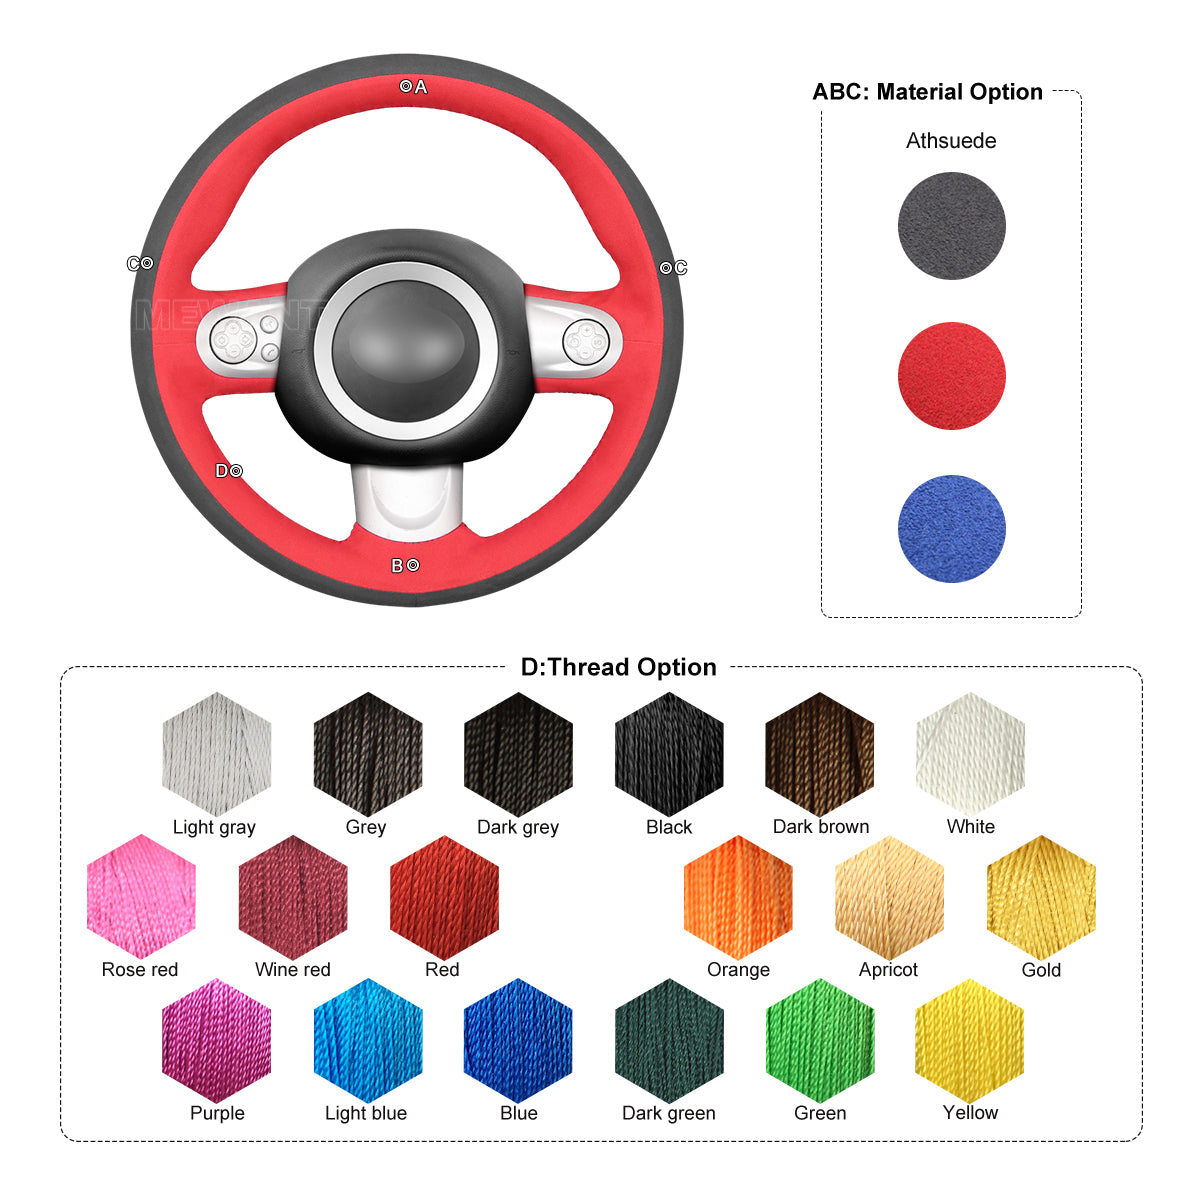 Car steering wheel cover for Mini(Hatchback/Mini R56/R57) 2006-2013 / Clubman 2007-2014 / Clubvan 2012-2014 / Convertible 2009-2015 / Countryman 2010-2015 / Coupe 2010-2016 / Paceman 2012-2017 / Roadster 2012-2015 (3-Spoke)